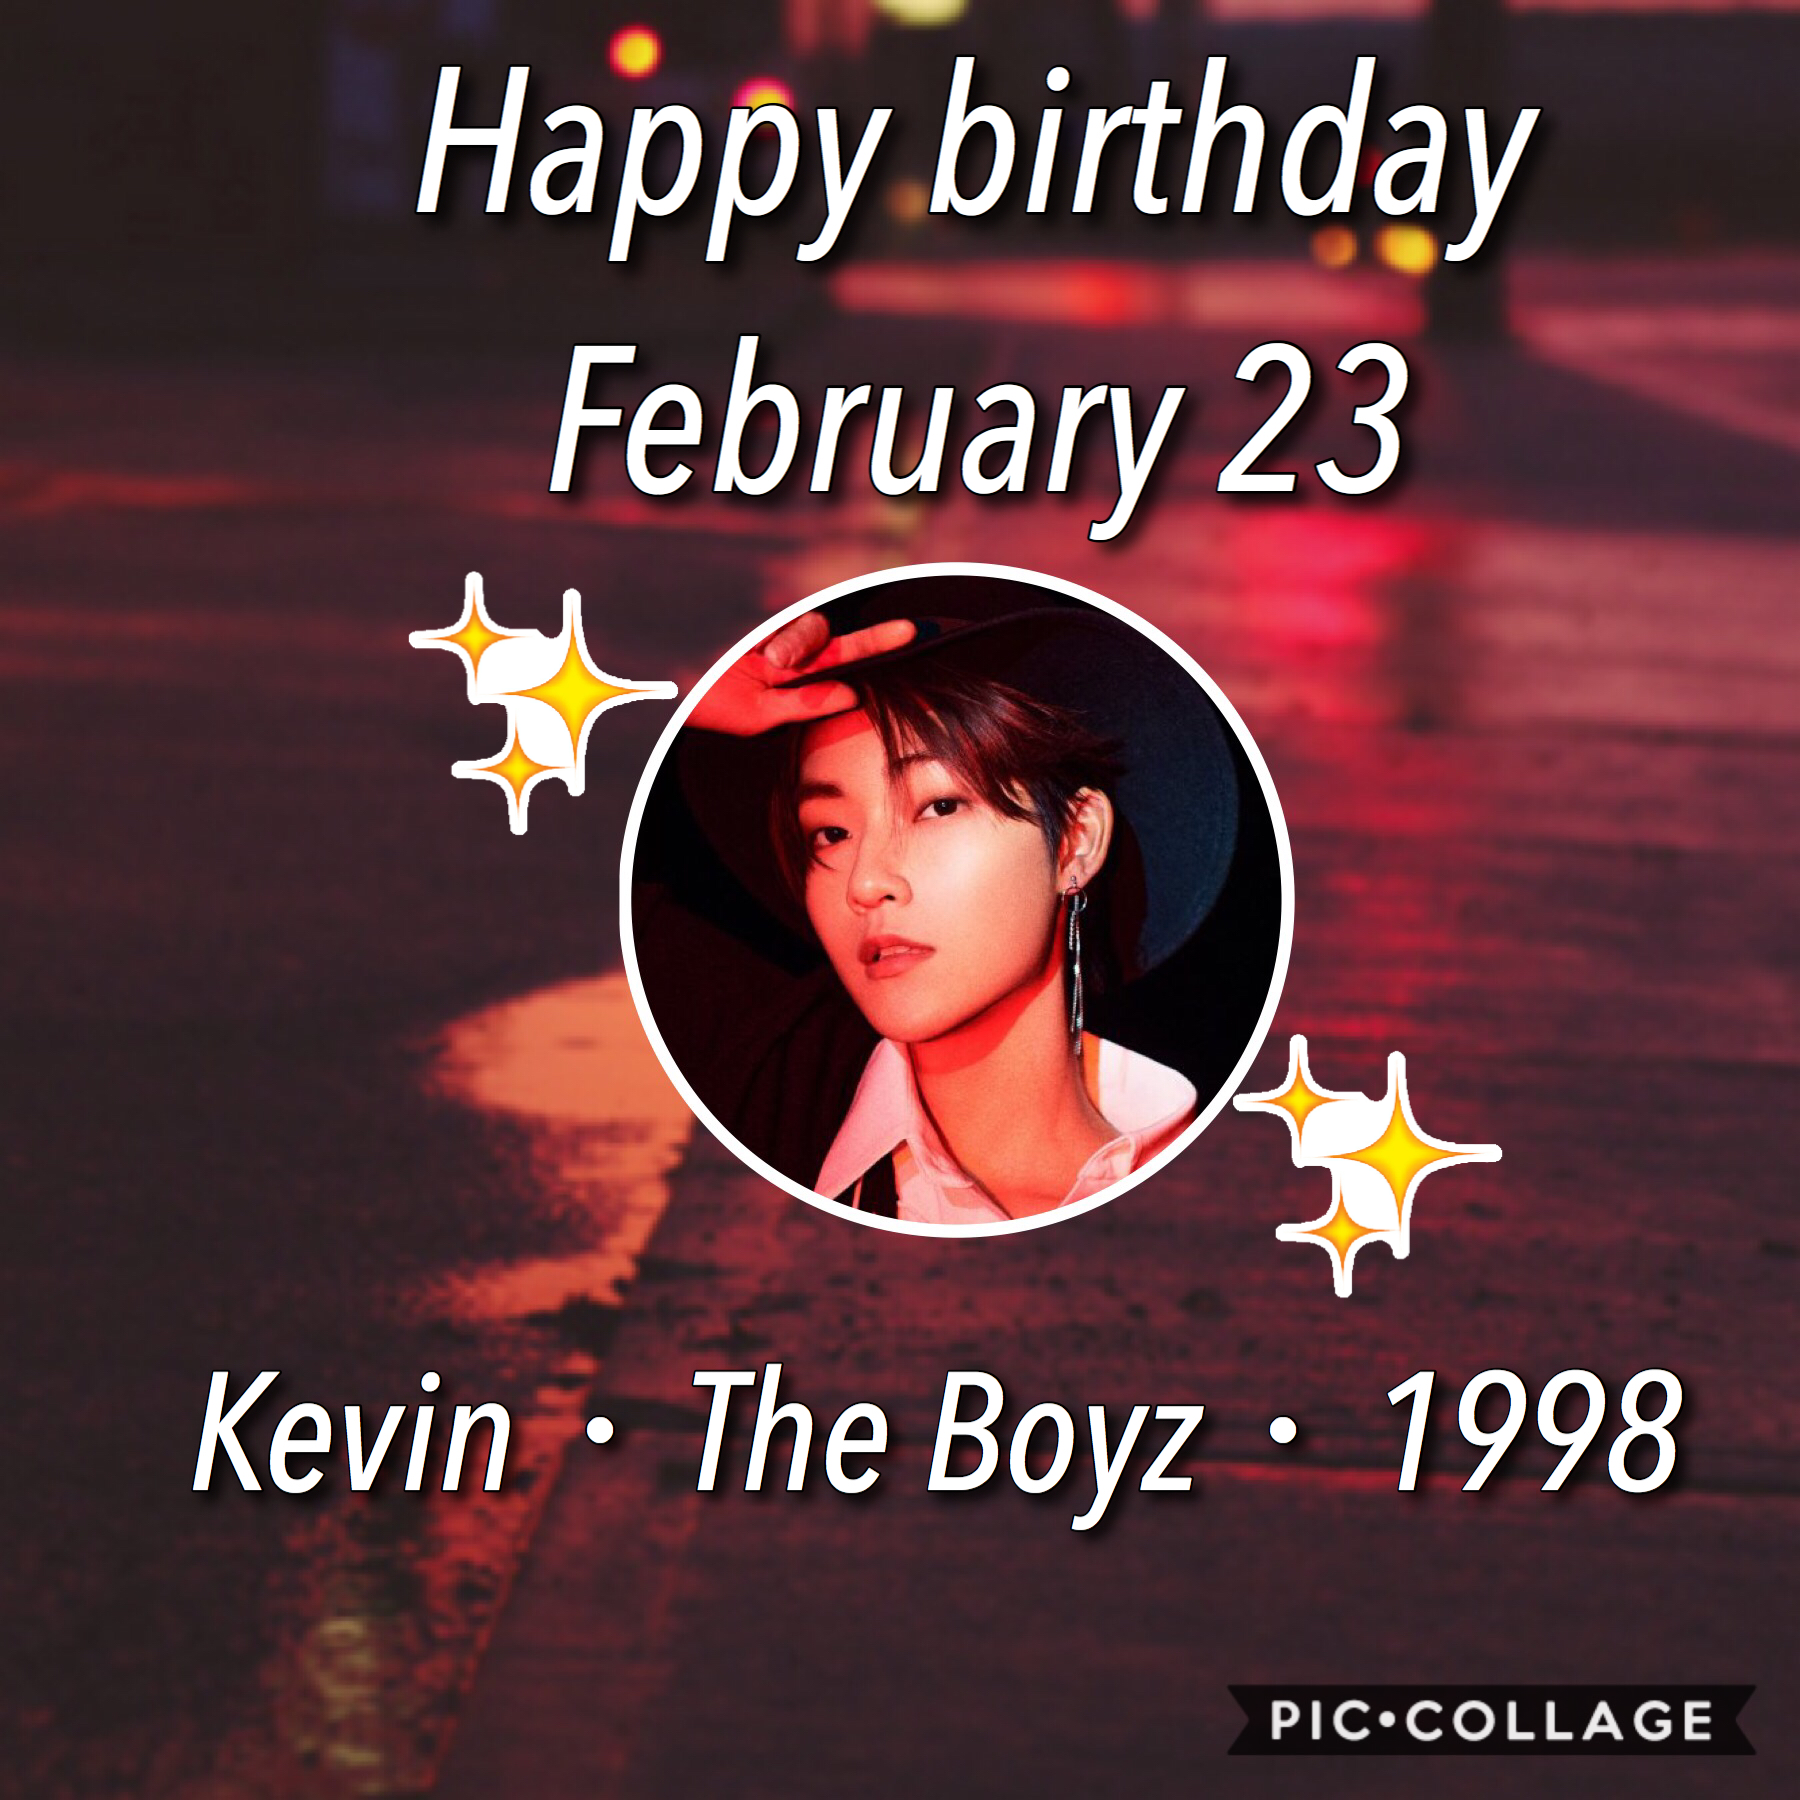 •🎈❄️•
Happy birthday!❤️❤️❤️ Listen to Reveal by The Boyz if you haven’t already- it’s a bop!
Other birthdays today:
• Golden Child’s DongHyun 
☃️❄️~Whoop~❄️☃️